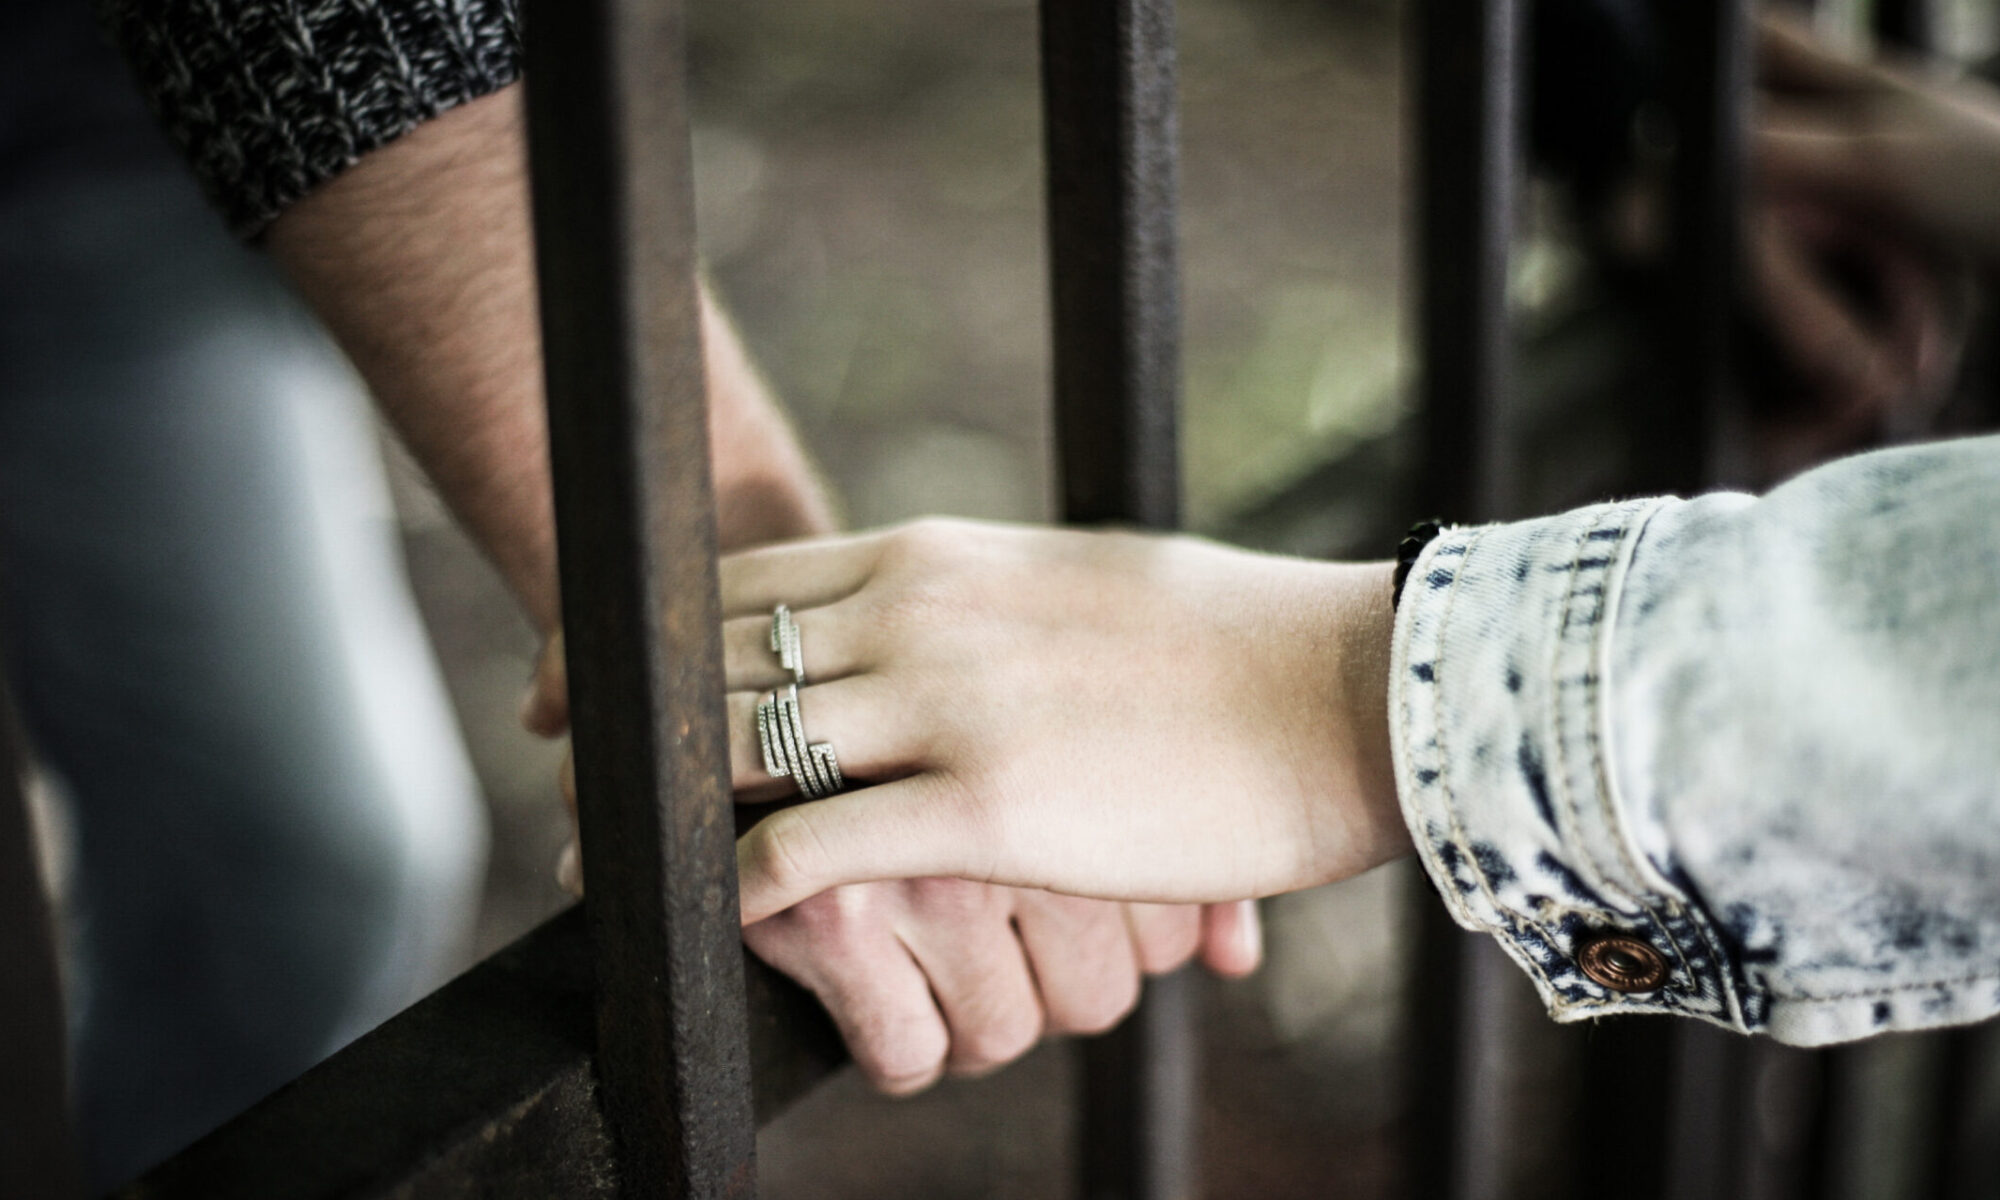 I’m pregnant and my boyfriend is in jail